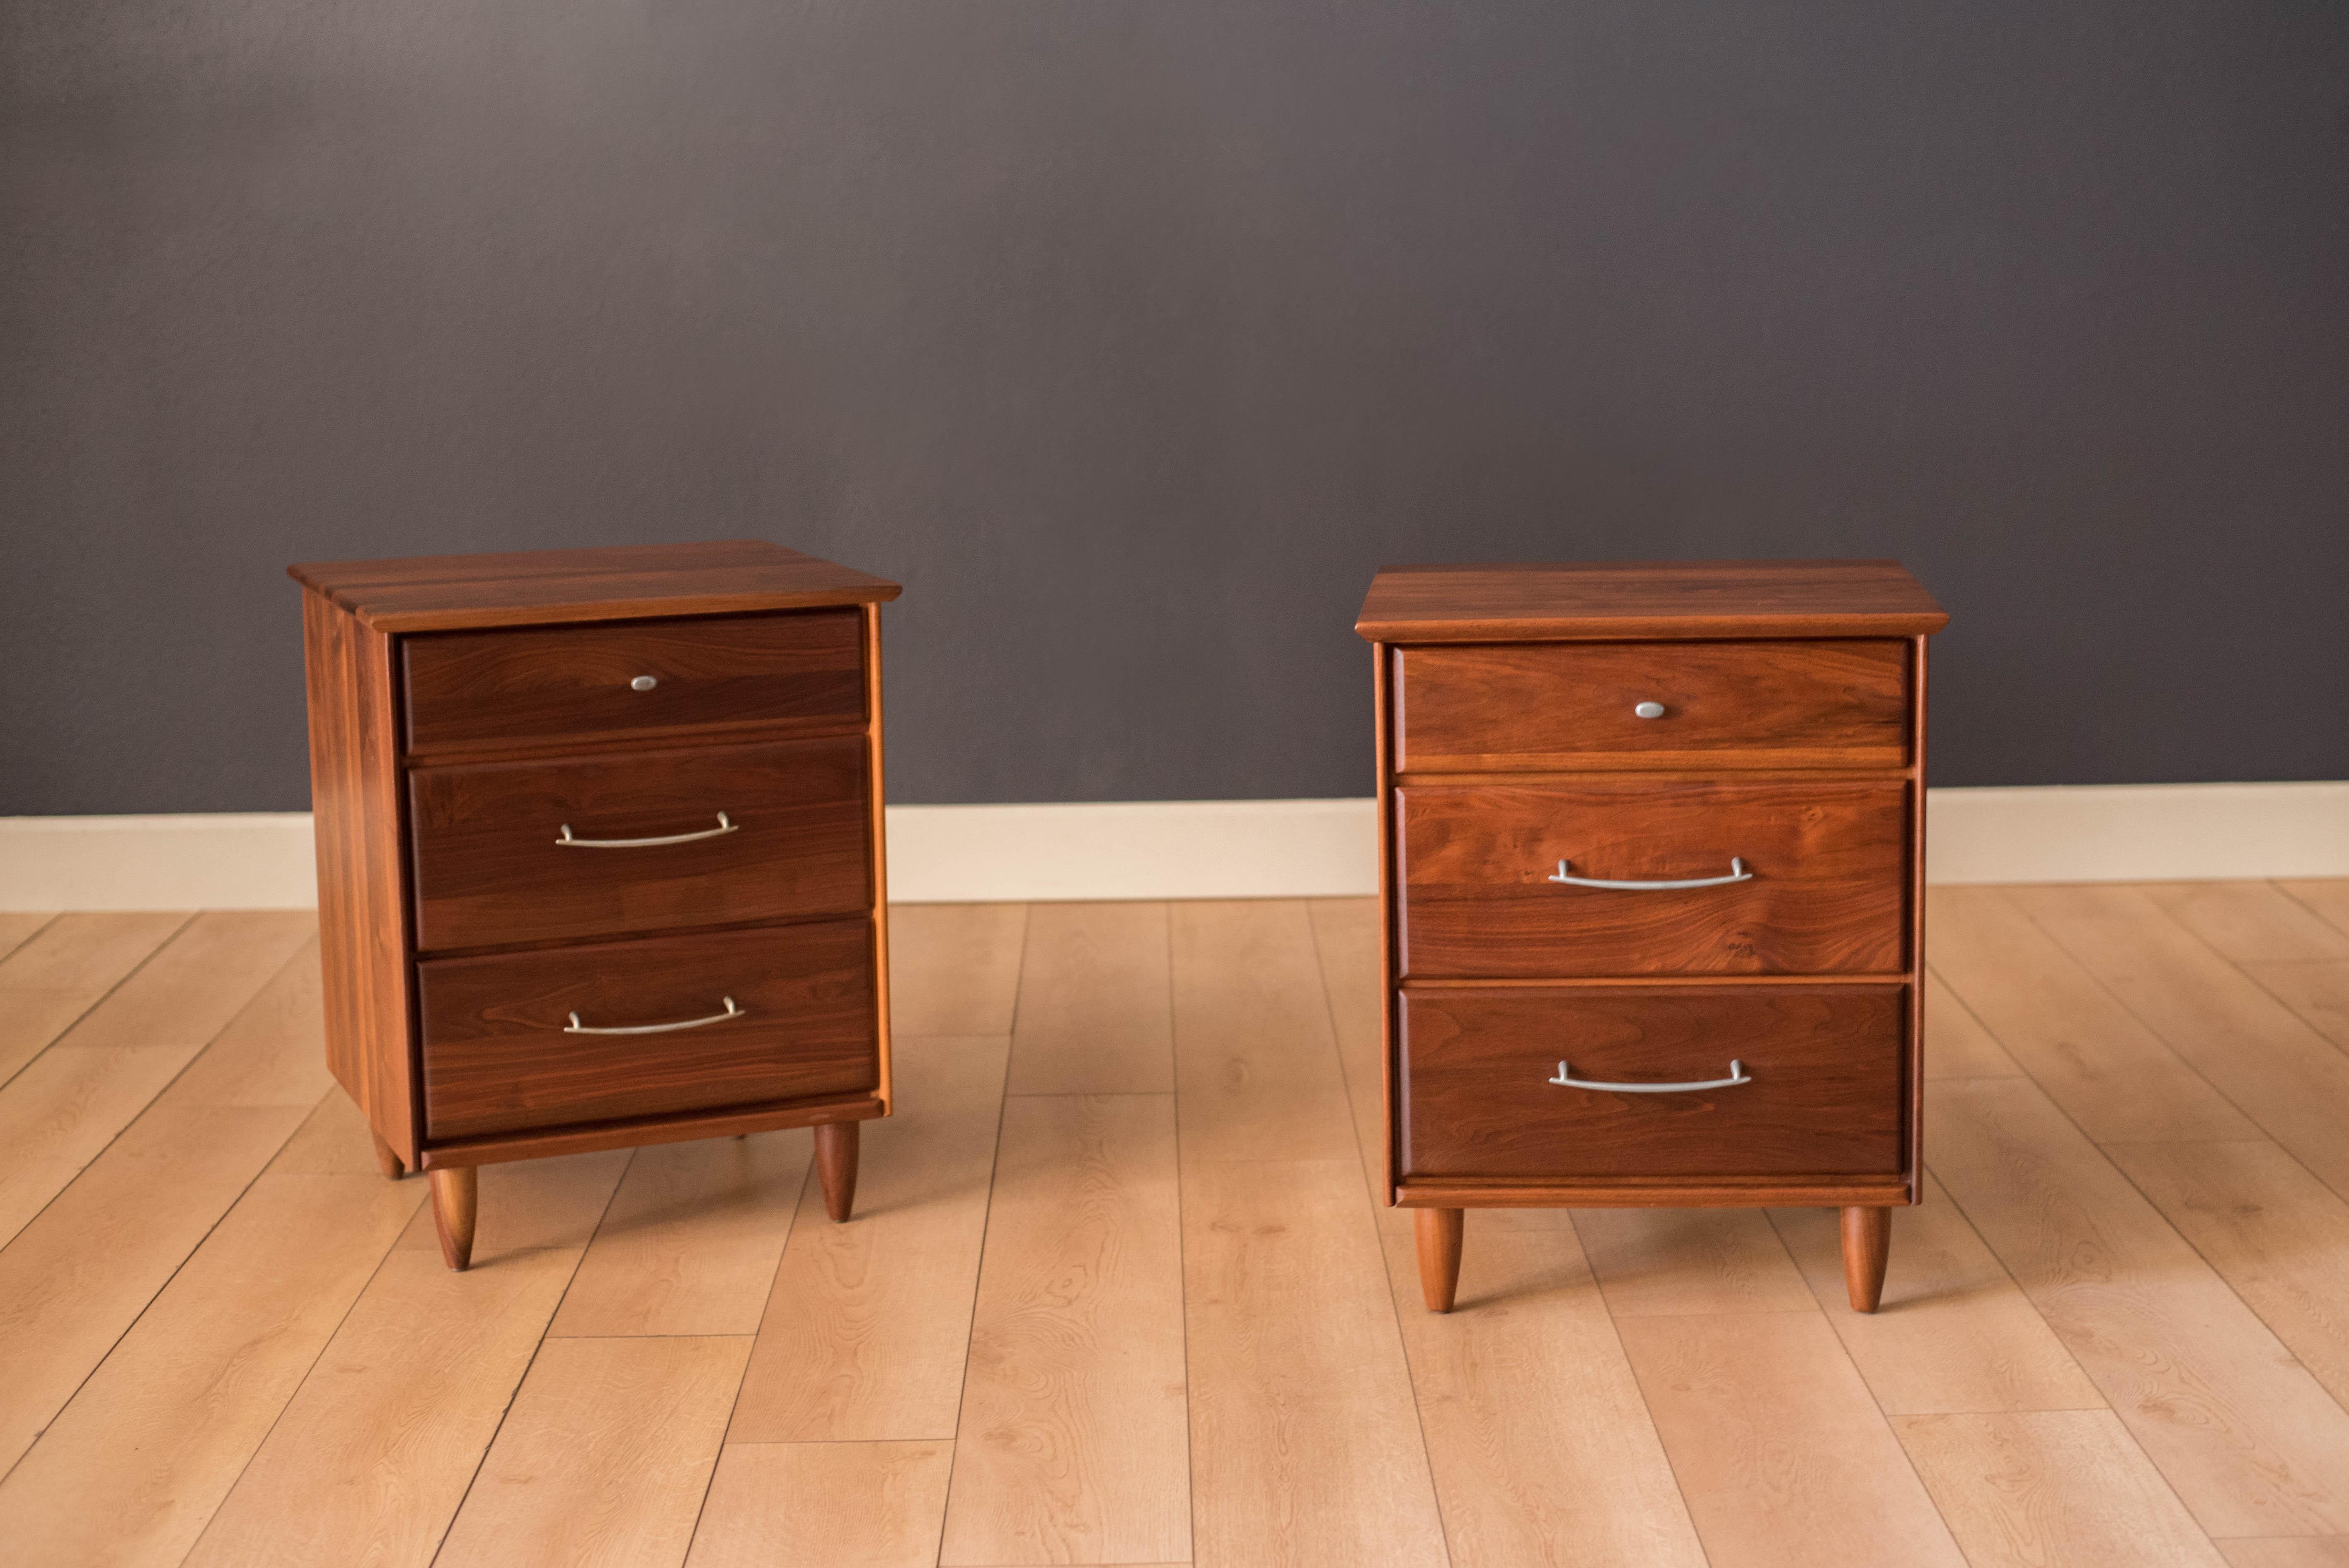 Mid-Century Modern pair of nightstands or bedside tables by ACE-HI Furniture, California. This set is made of solid planked walnut and includes three storage drawers with pewter handles. Price is for the pair.